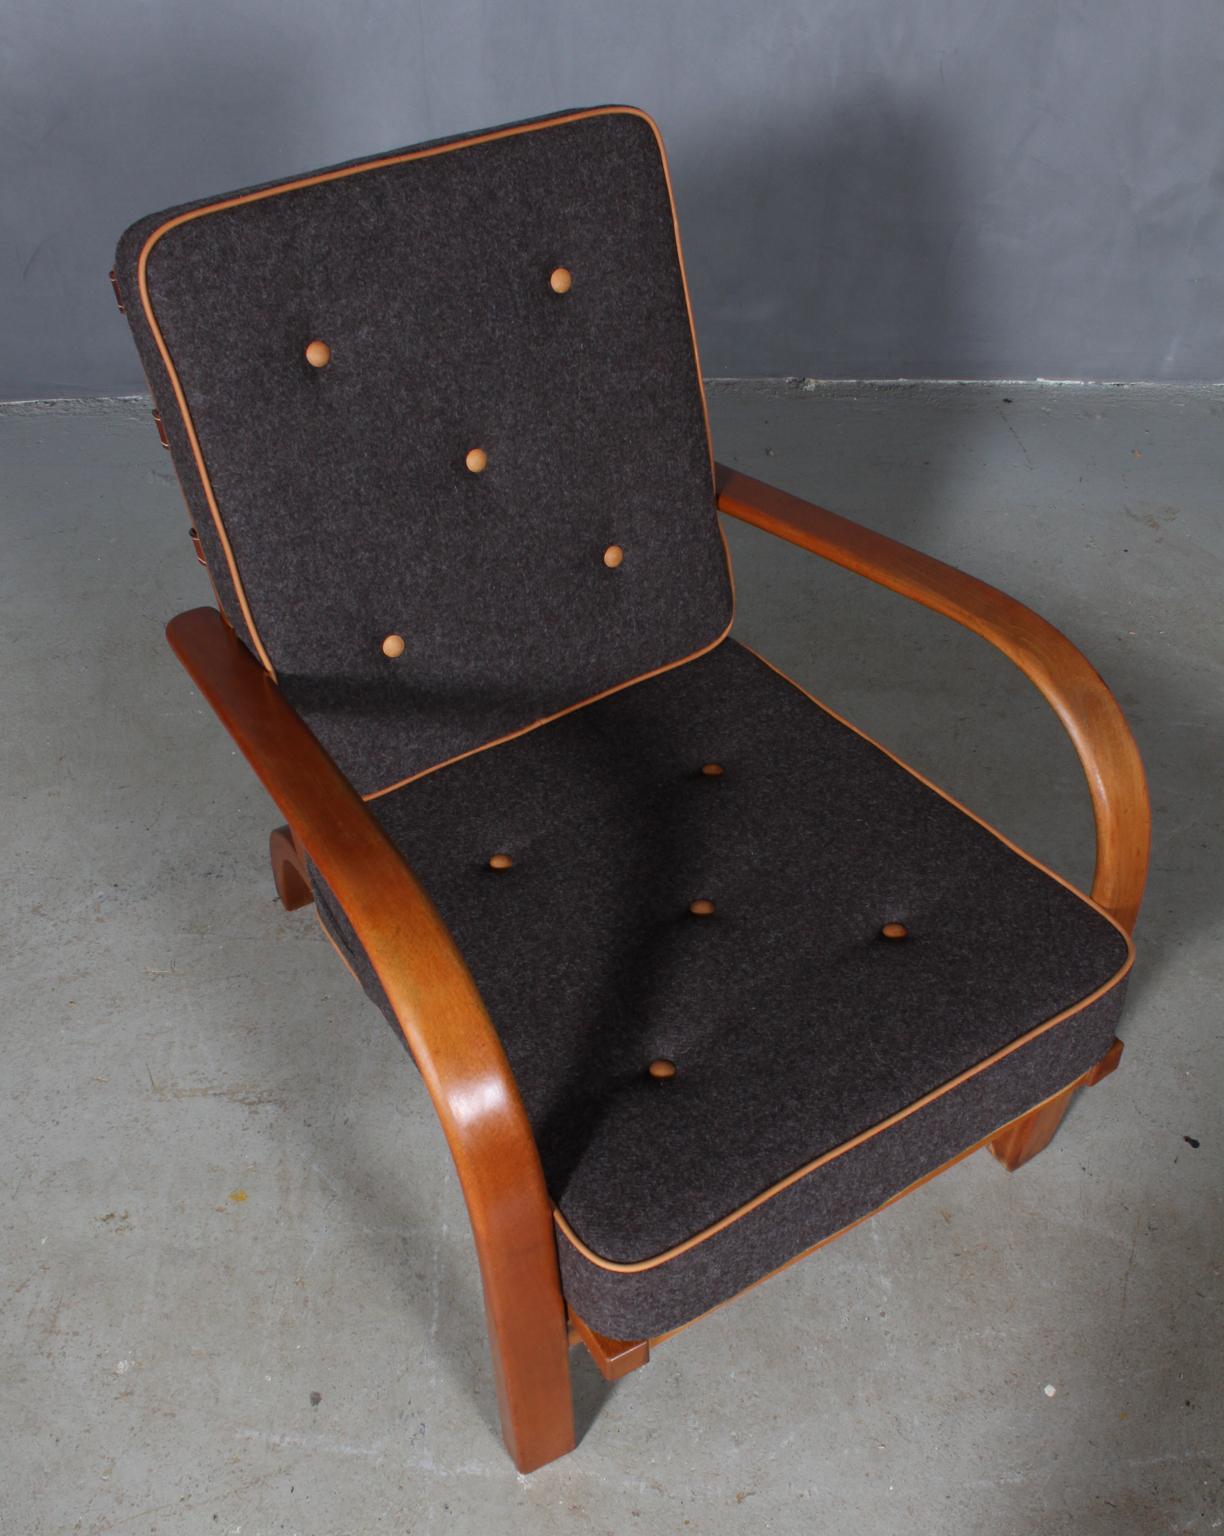 Fritz Hansen lounge chair with frame of beech.

New upholstered with 100 % New Zealand Divina wool and vintage aniline leather.

Original leather straps in the back.

Made by Fritz Hansen in the 1930s.